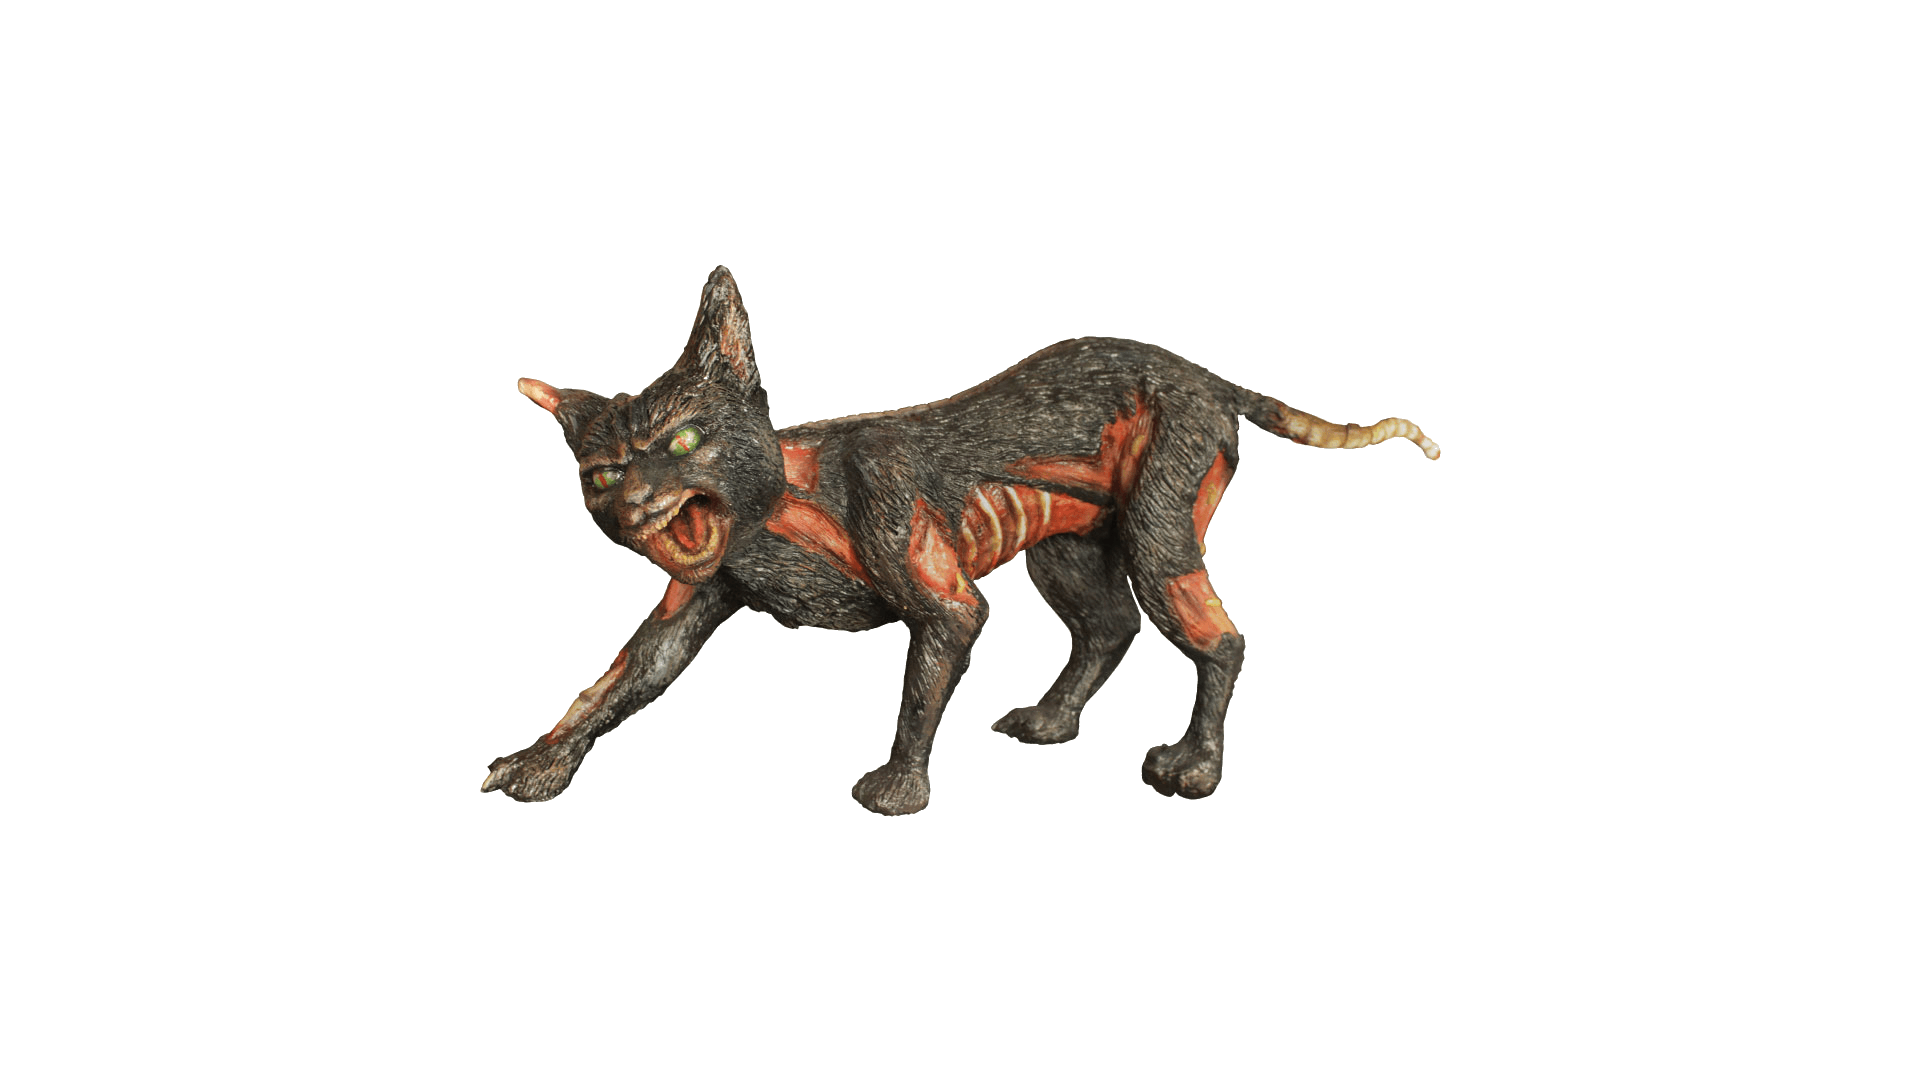 Cursed Cat Life Size Mythical Prop Decor Resin Statue - LM Treasures Prop Rentals 